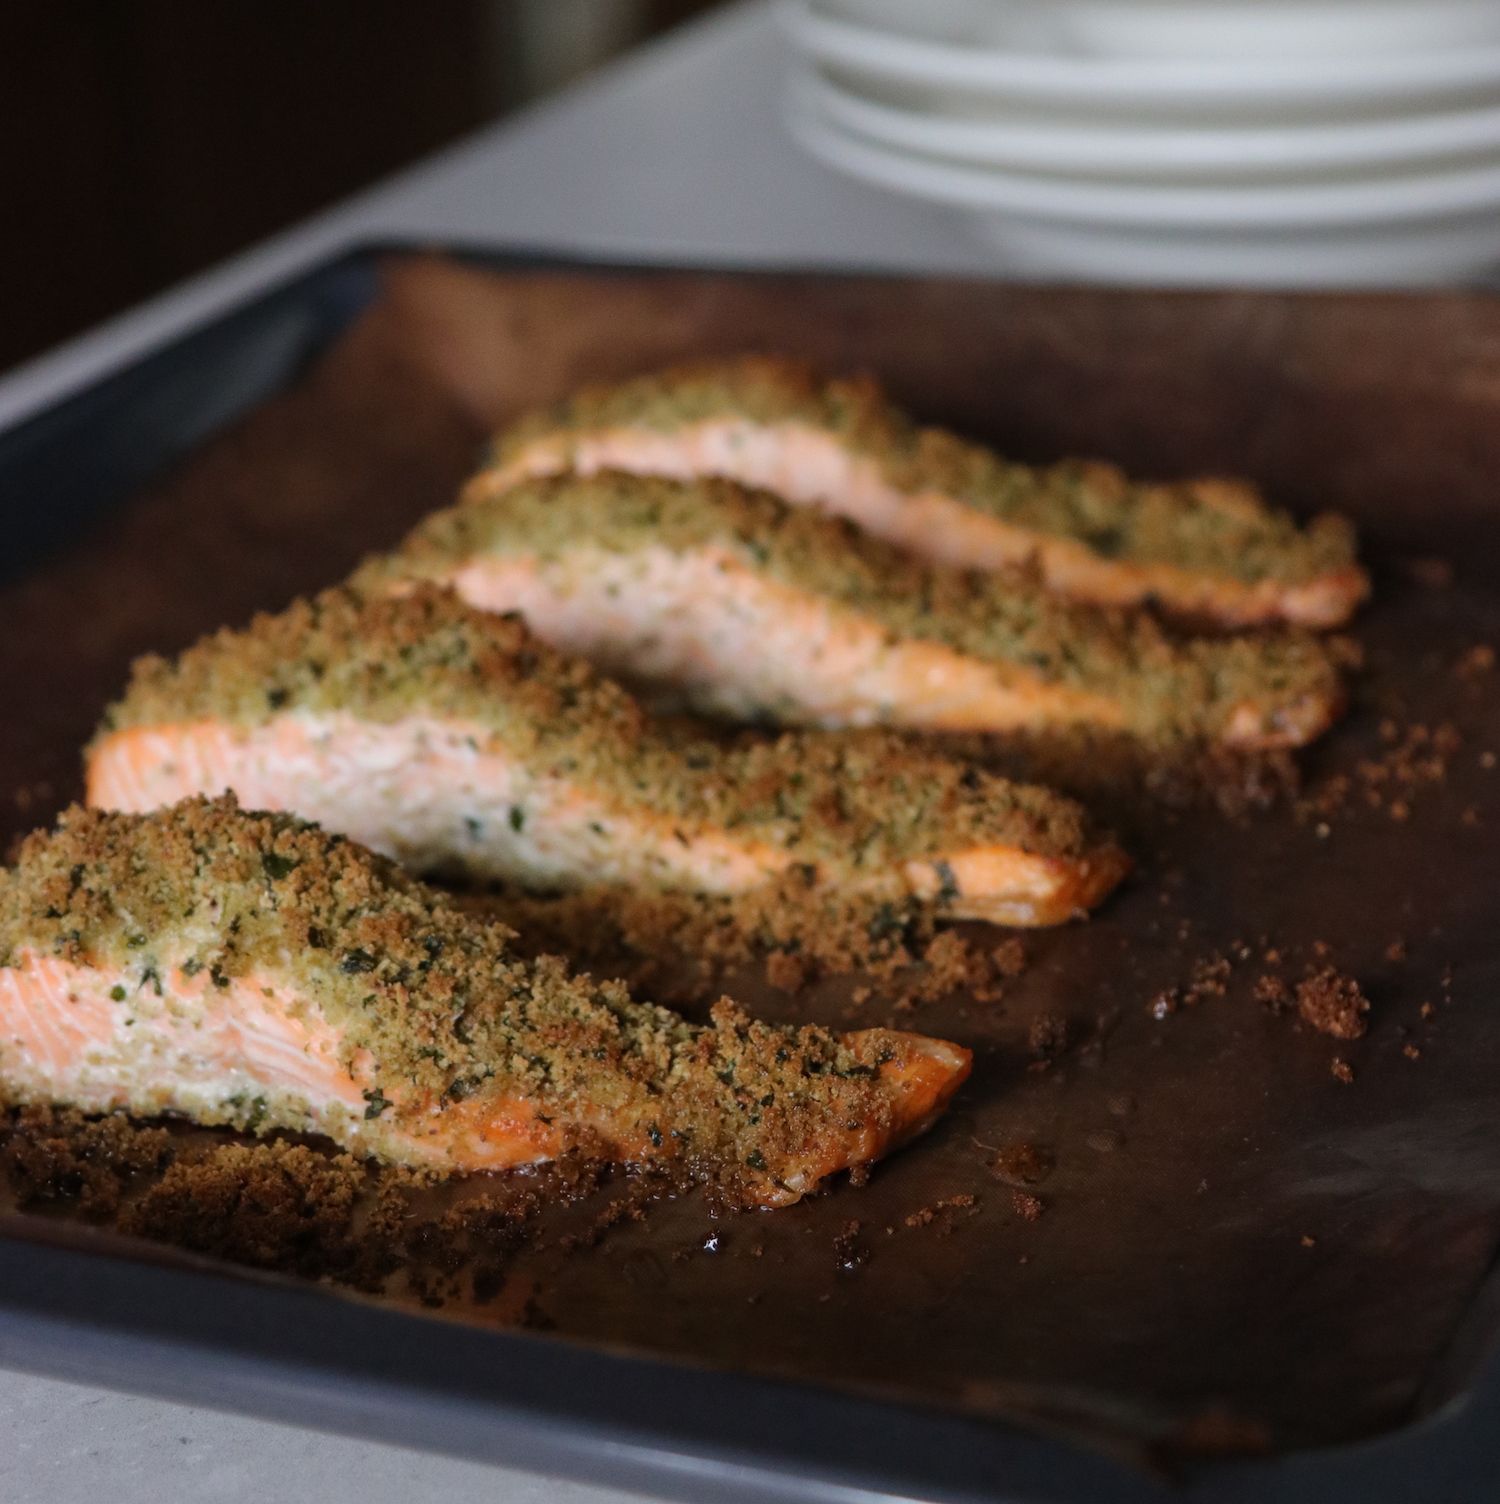 Recipe Notes | Herb Crust Salmon, Sweet Potato Chips and Parmesan Broccoli